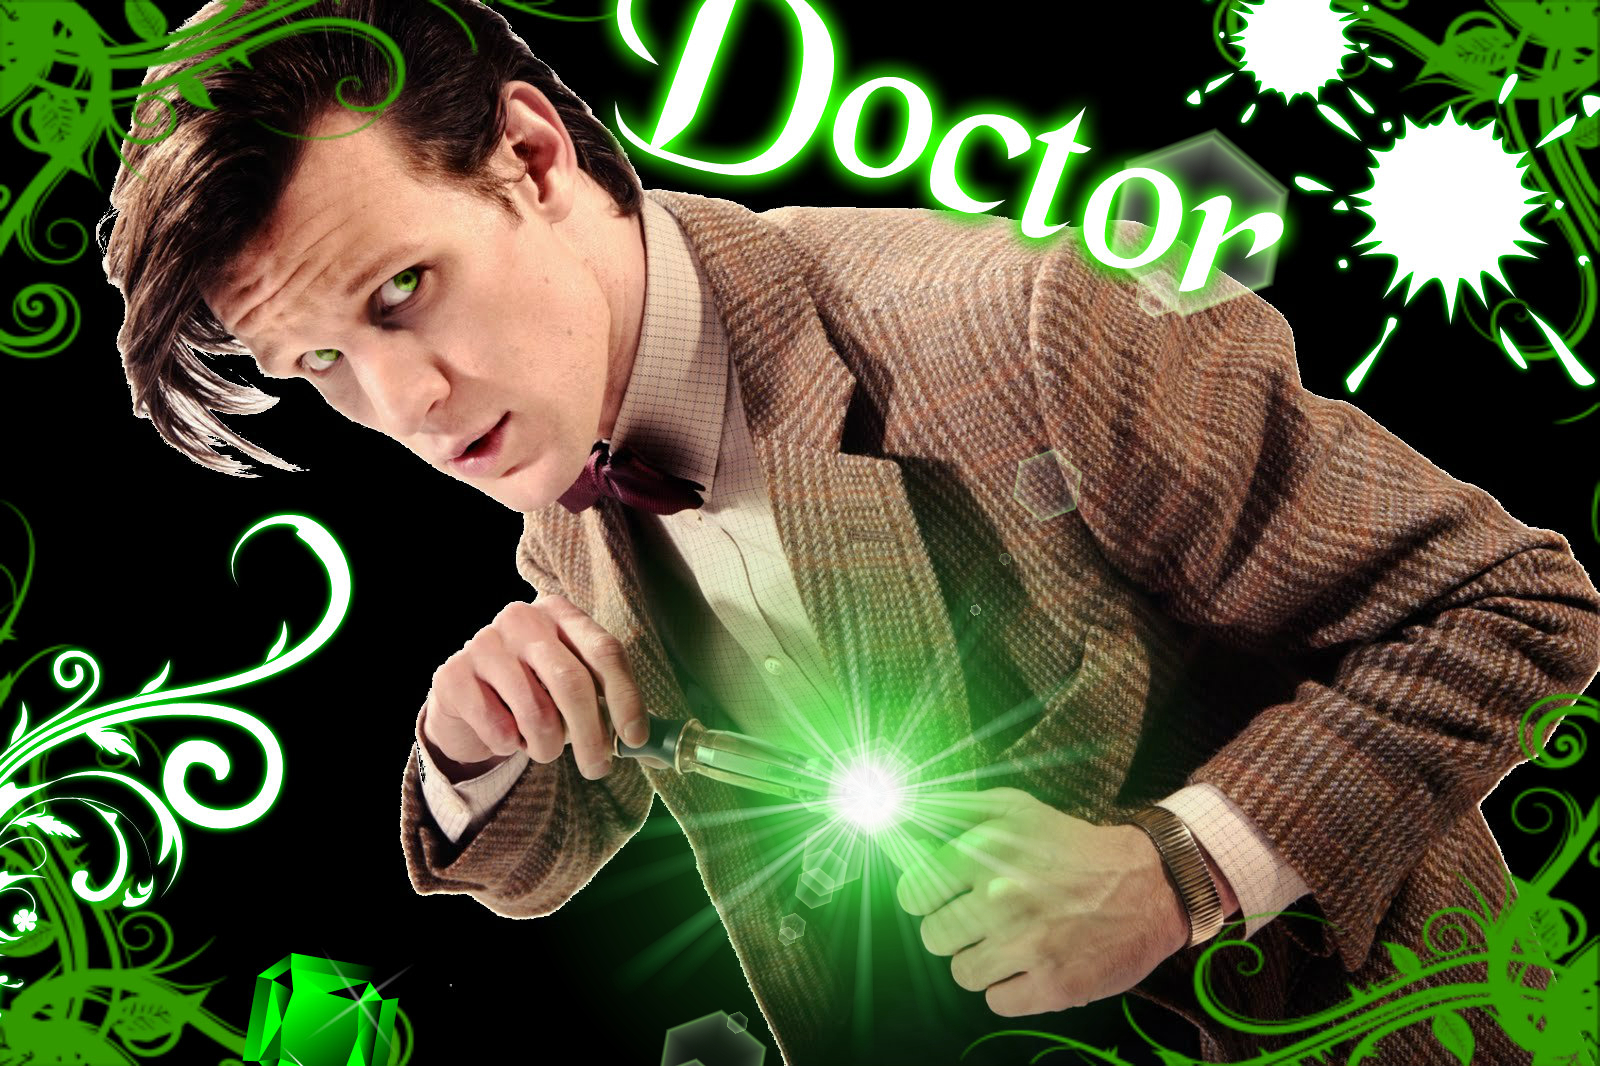 the 11th doctor wallpaper by chrisily customization wallpaper science 1600x1066